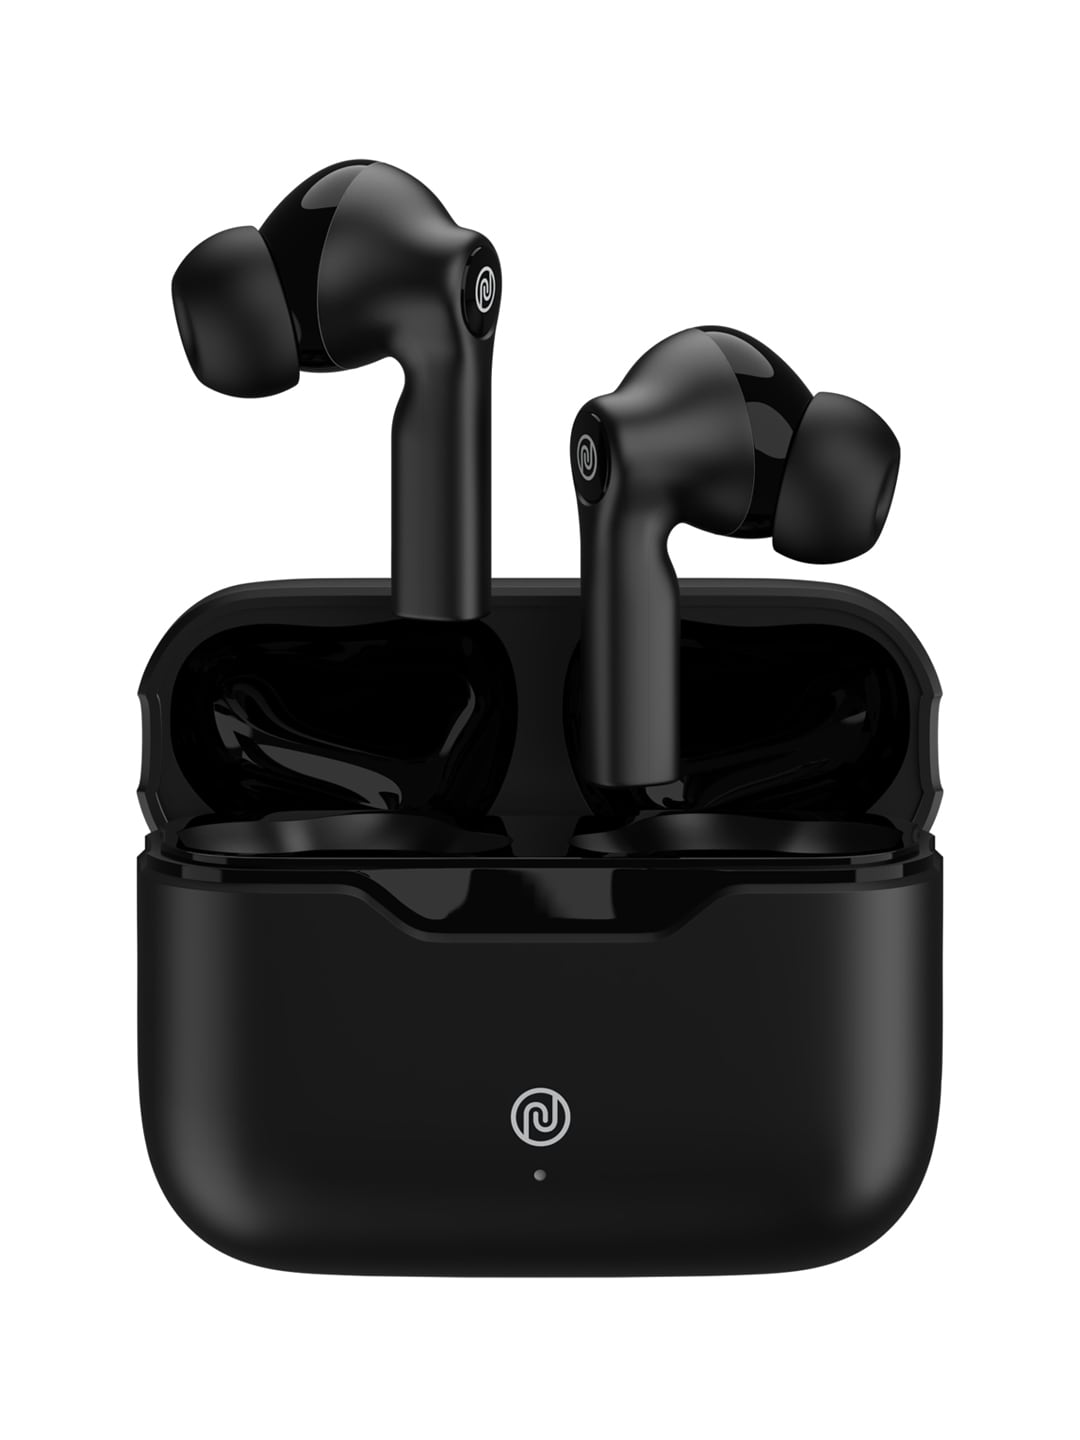 Noise Buds VS103 M Truly Wireless Earbuds with Hypersync Technology - Jet Black Price in India